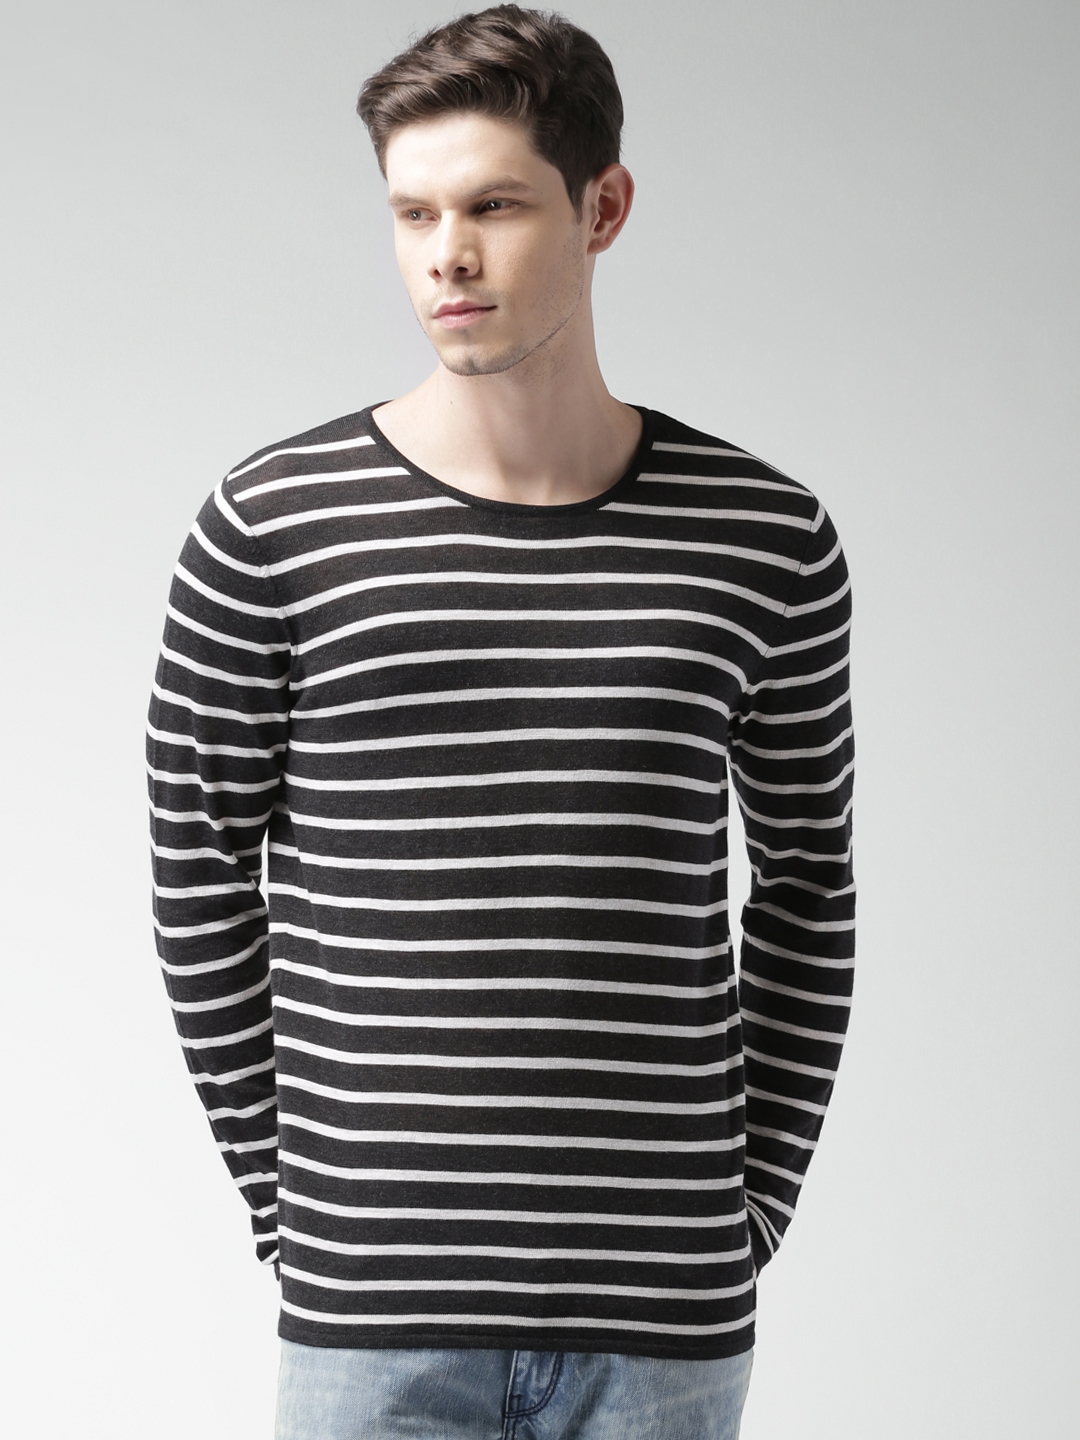 Buy Selected Black White Striped Pure Cotton T Shirt - Tshirts For Men  1428900 | Myntra